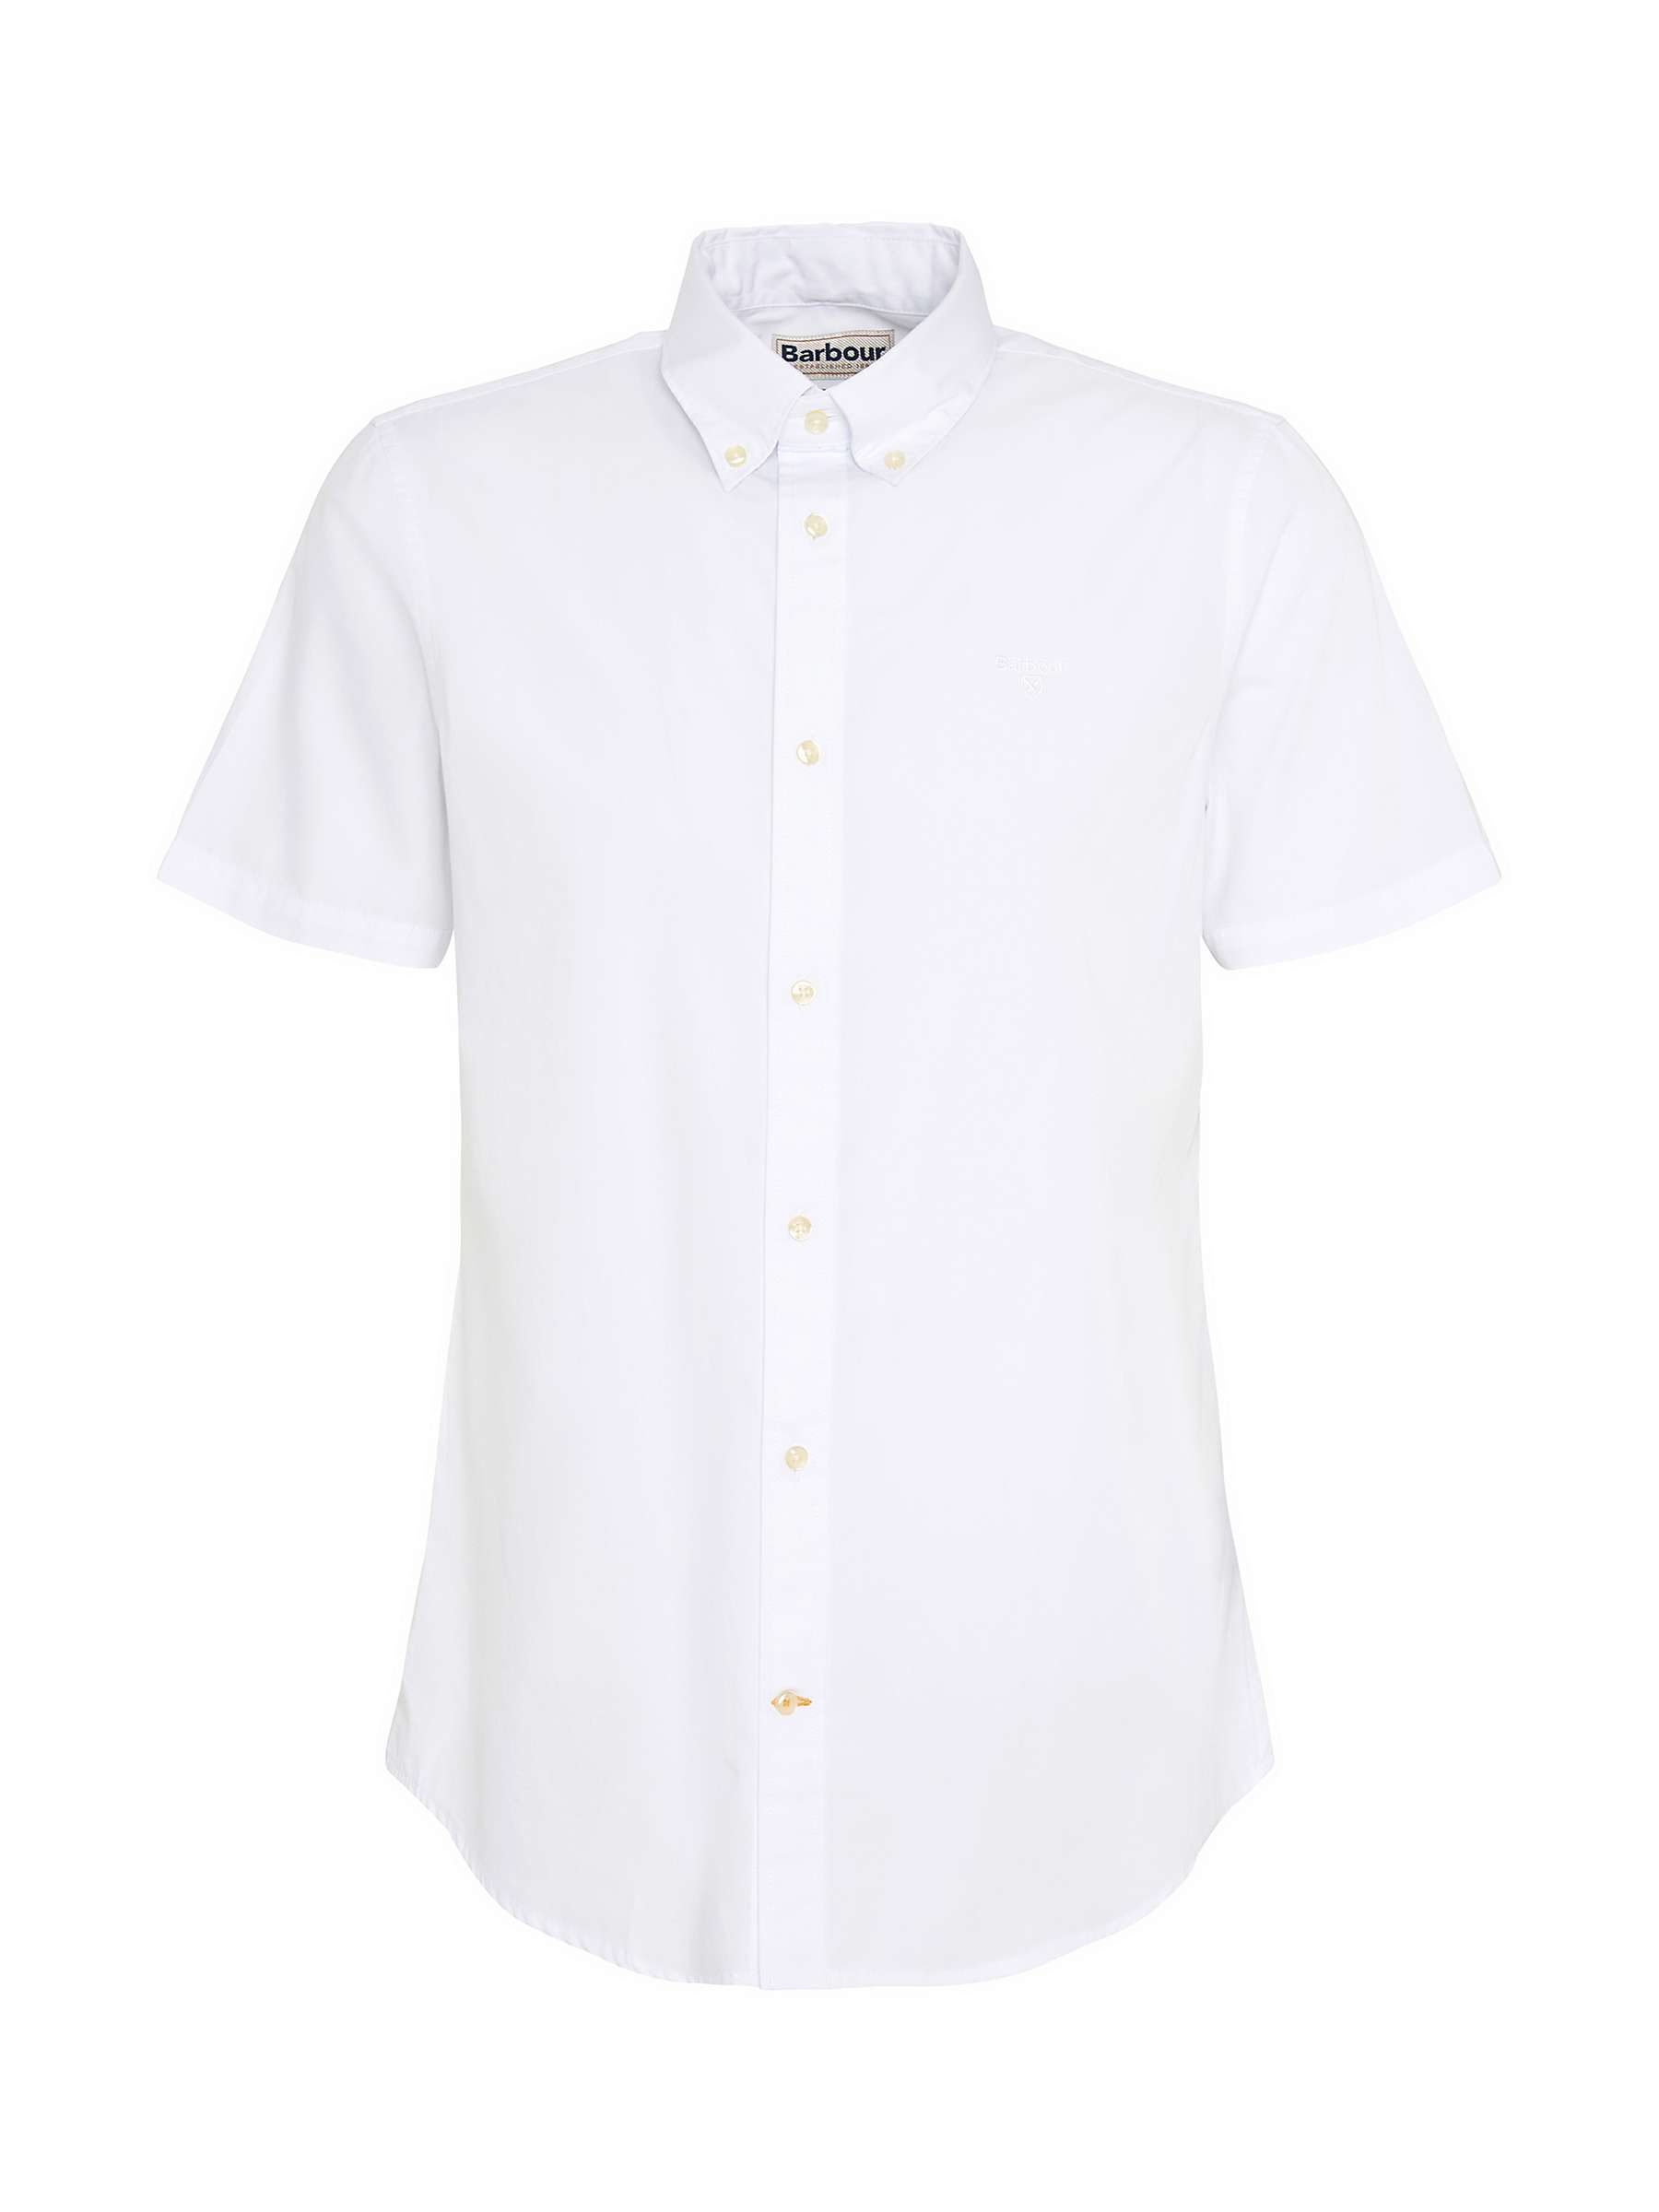 Buy Barbour Cotton Short Sleeve Tailored Shirt, White Online at johnlewis.com